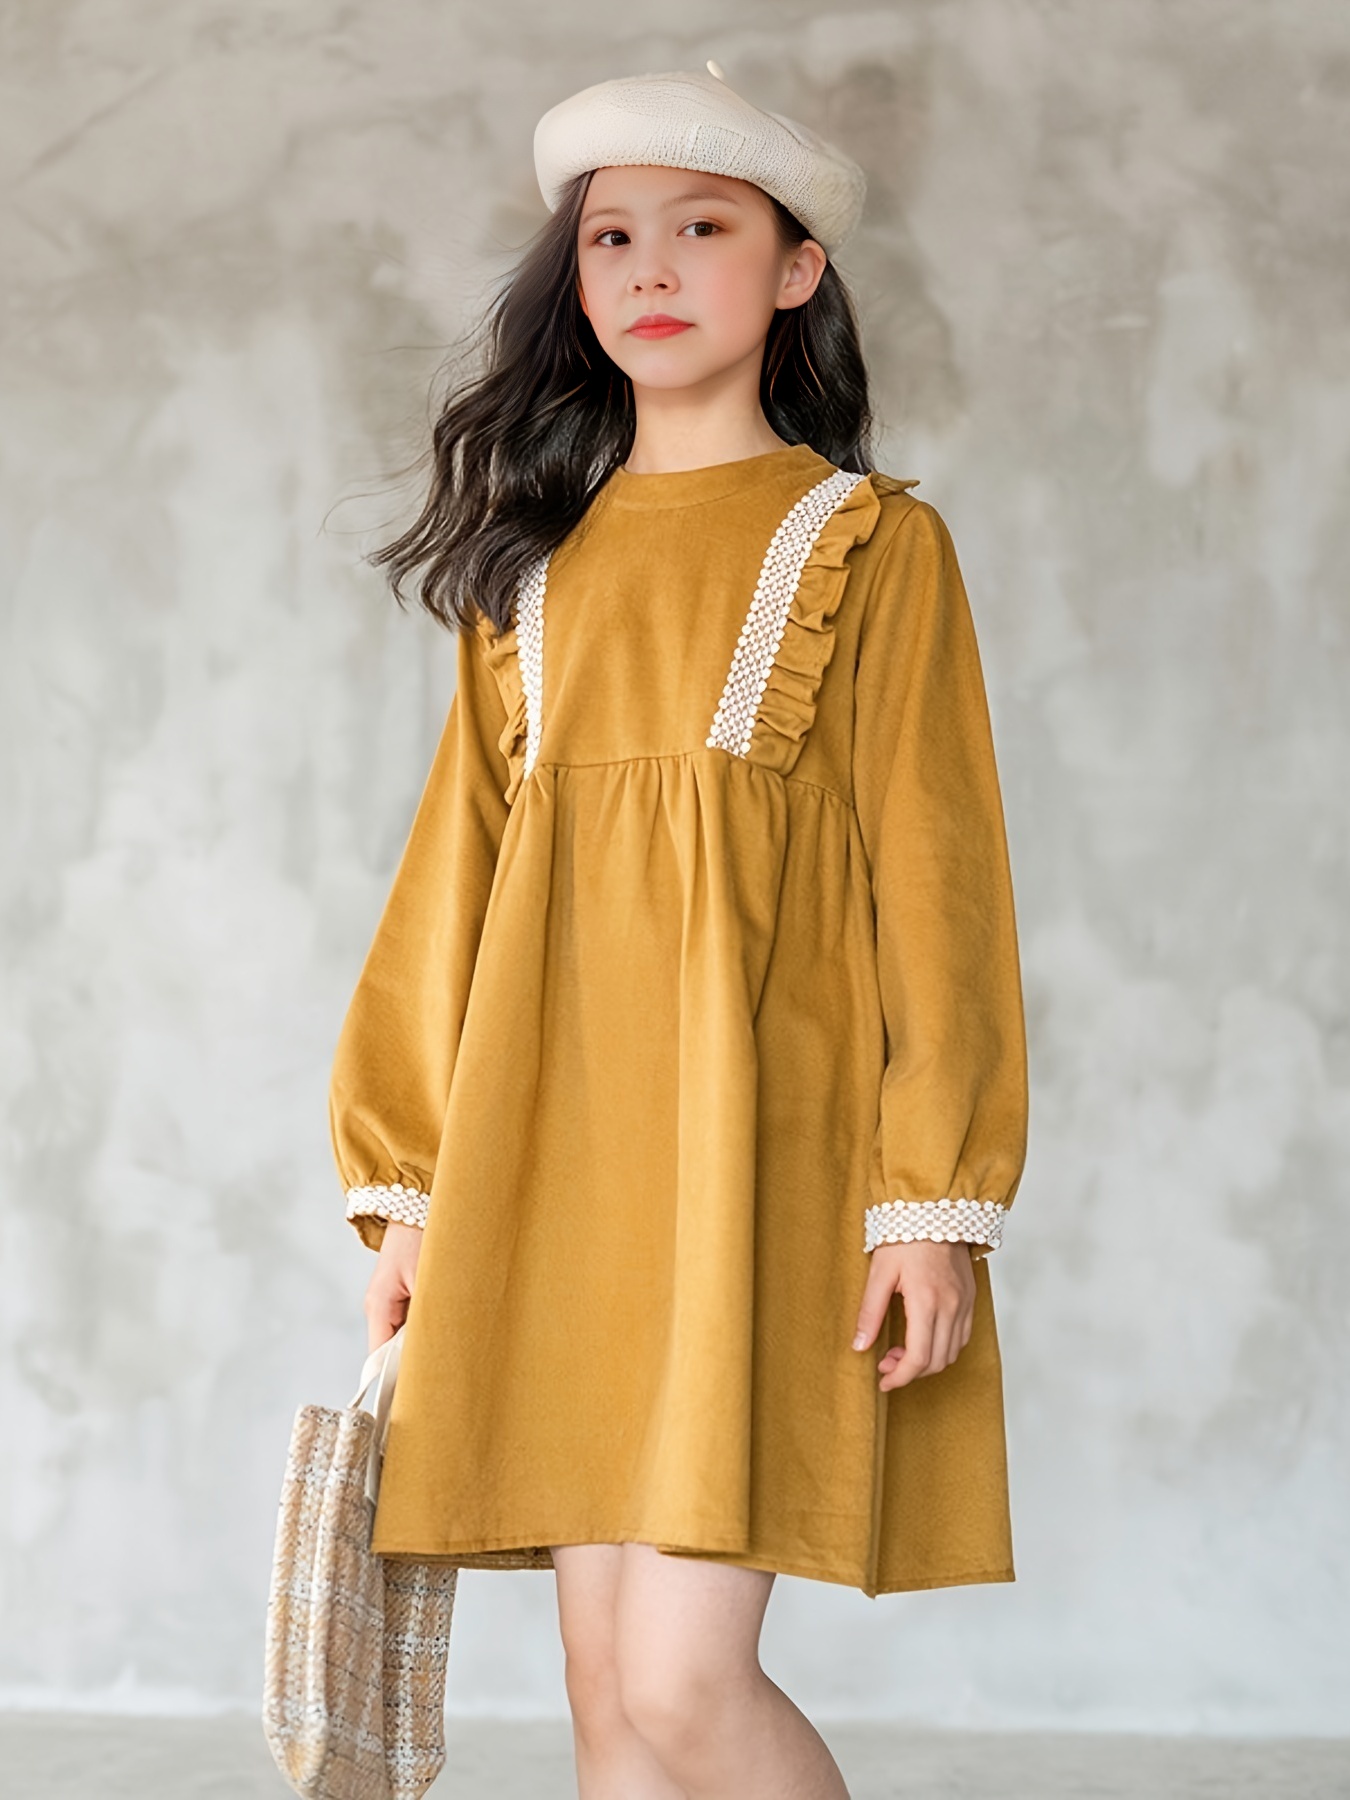 Girls Dress Long Lantern Sleeve Loose Flowy Swing Casual Dresses for Kids -  China Dress and Skirt price